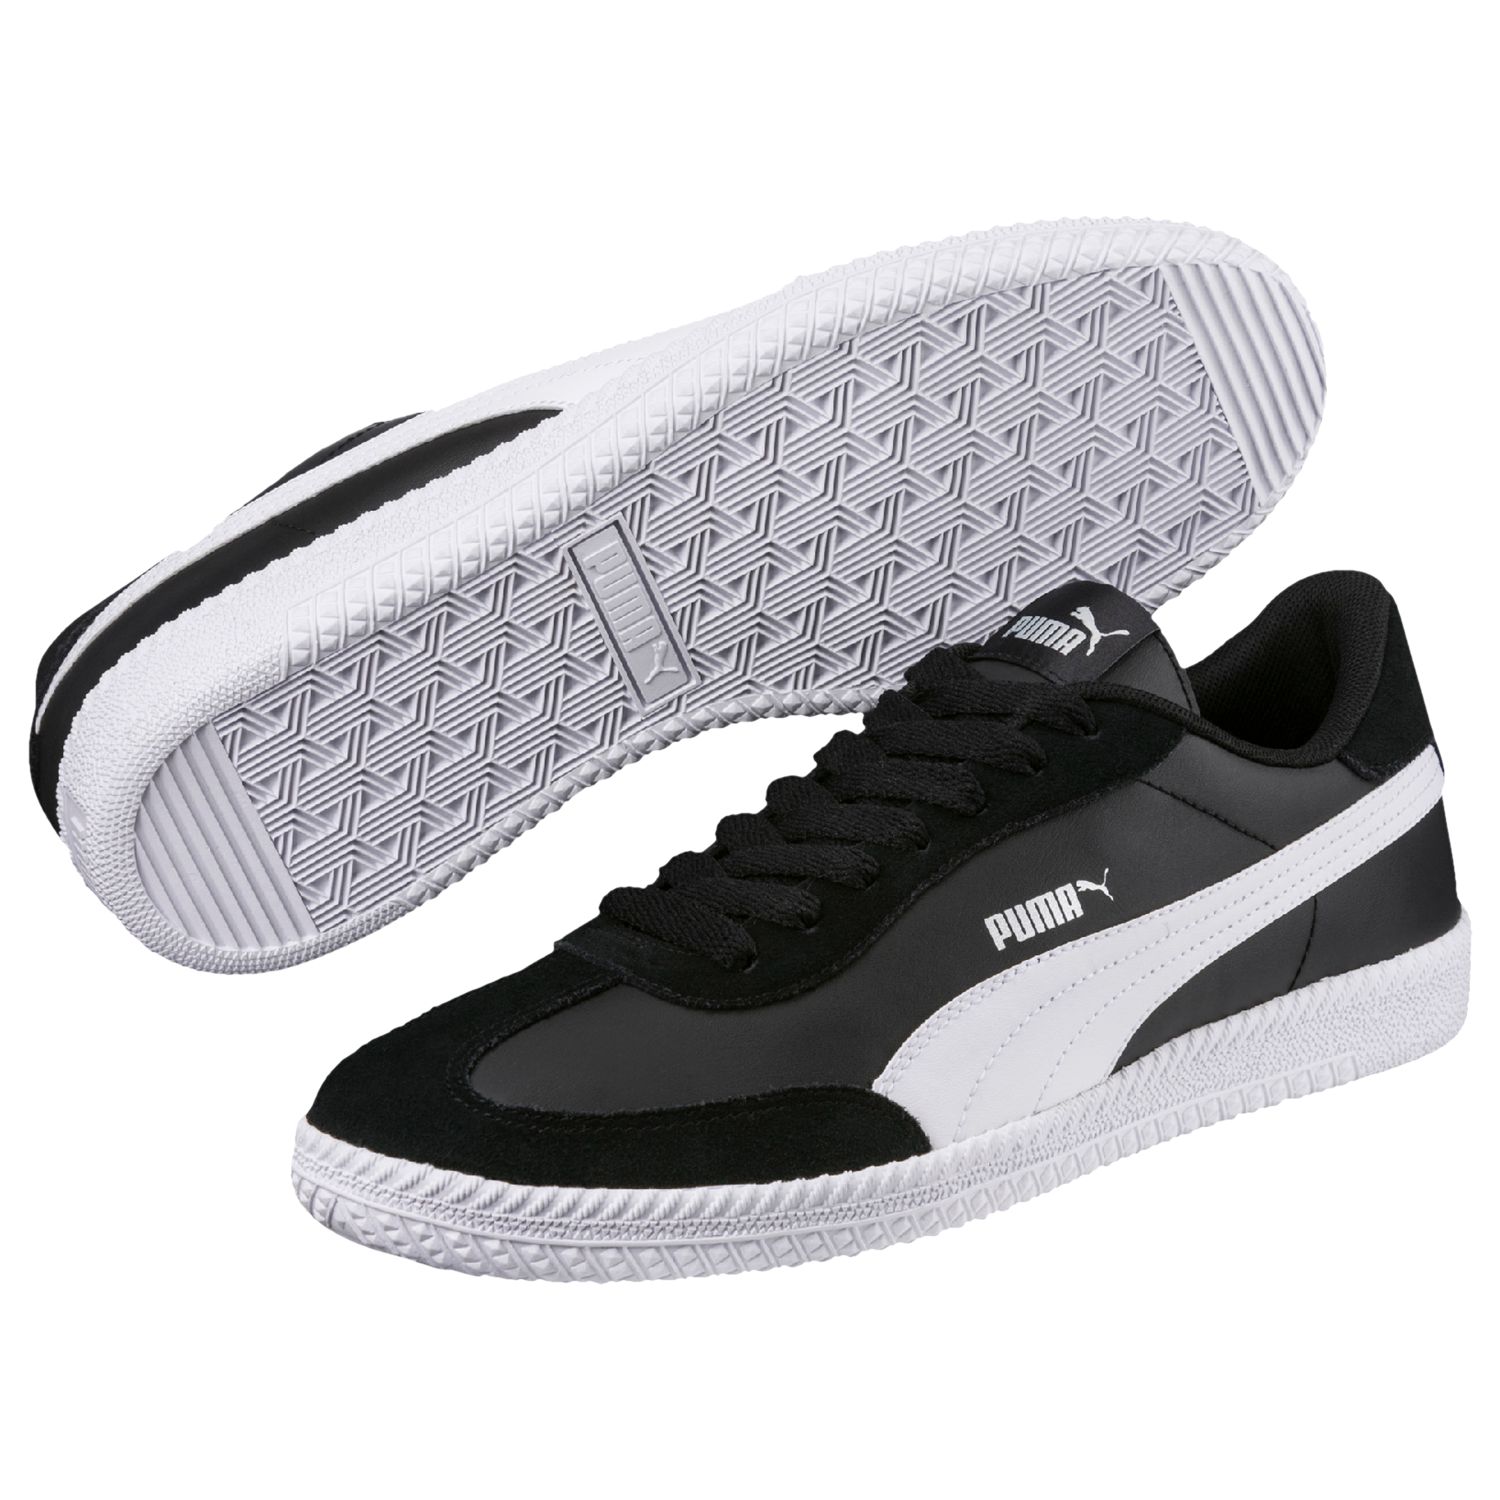 puma astro cup leather trainers